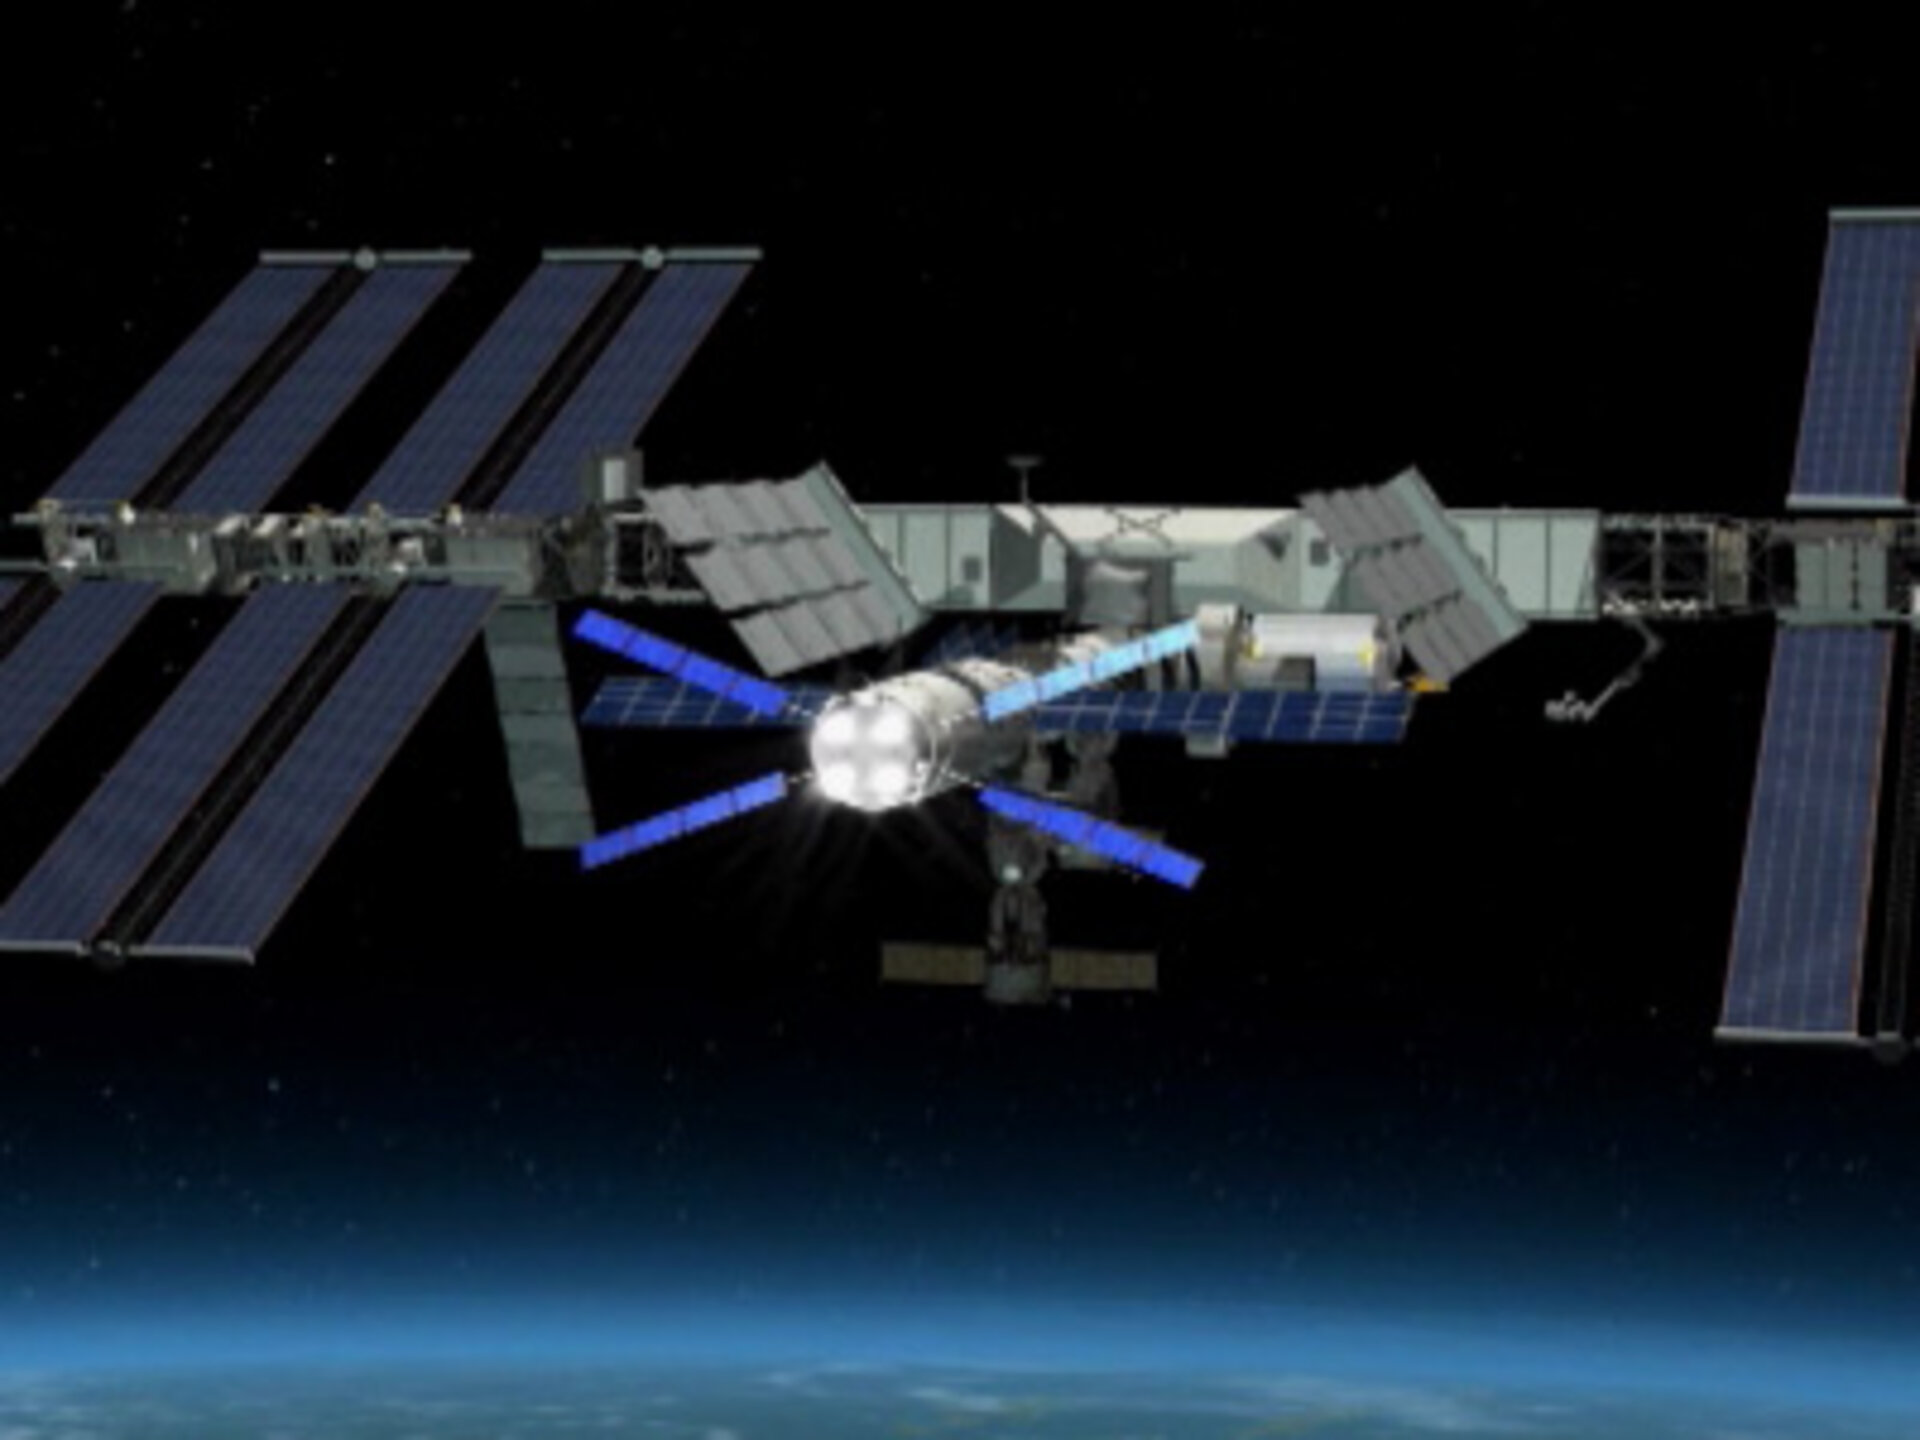 Yesterday's 20 minute burn of Jules Verne's main engines lifted the Space Station's orbit by 7 km